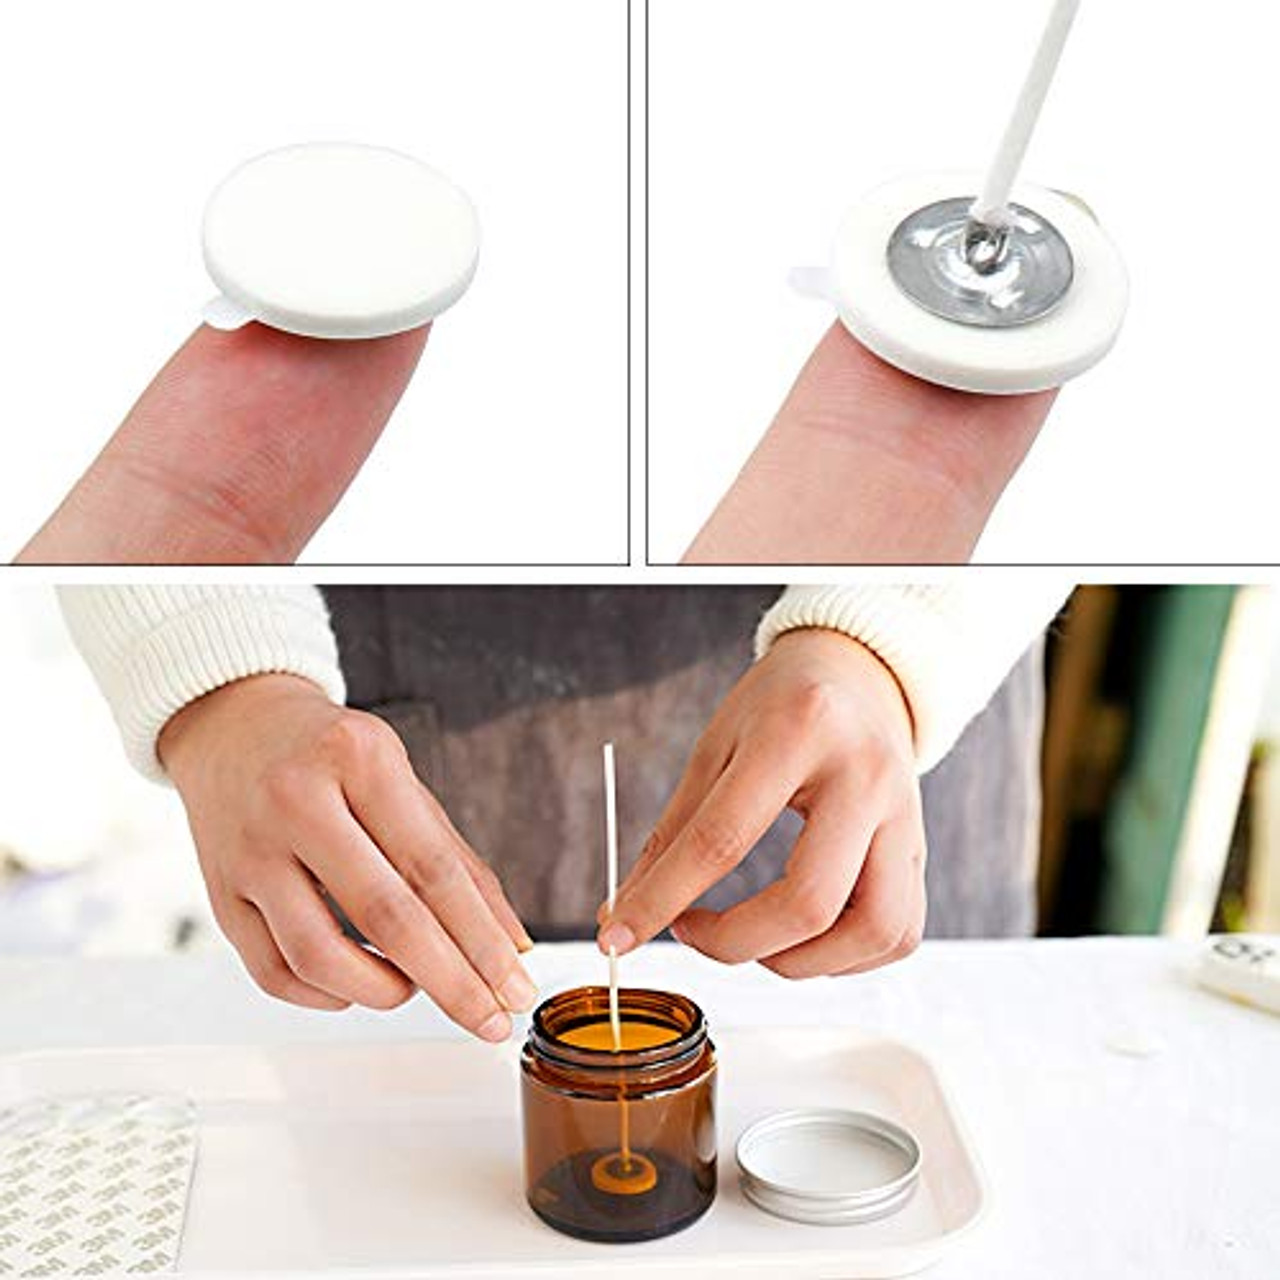 Candle Holder Wick for Candle Making - 150Pcs Wick Centering Tool Natural  Soy Wicks Candle Wick Holders - Metal Candle Holder Candle Wicks for Soy Wax  - Cotton Wick Stickers for Candle